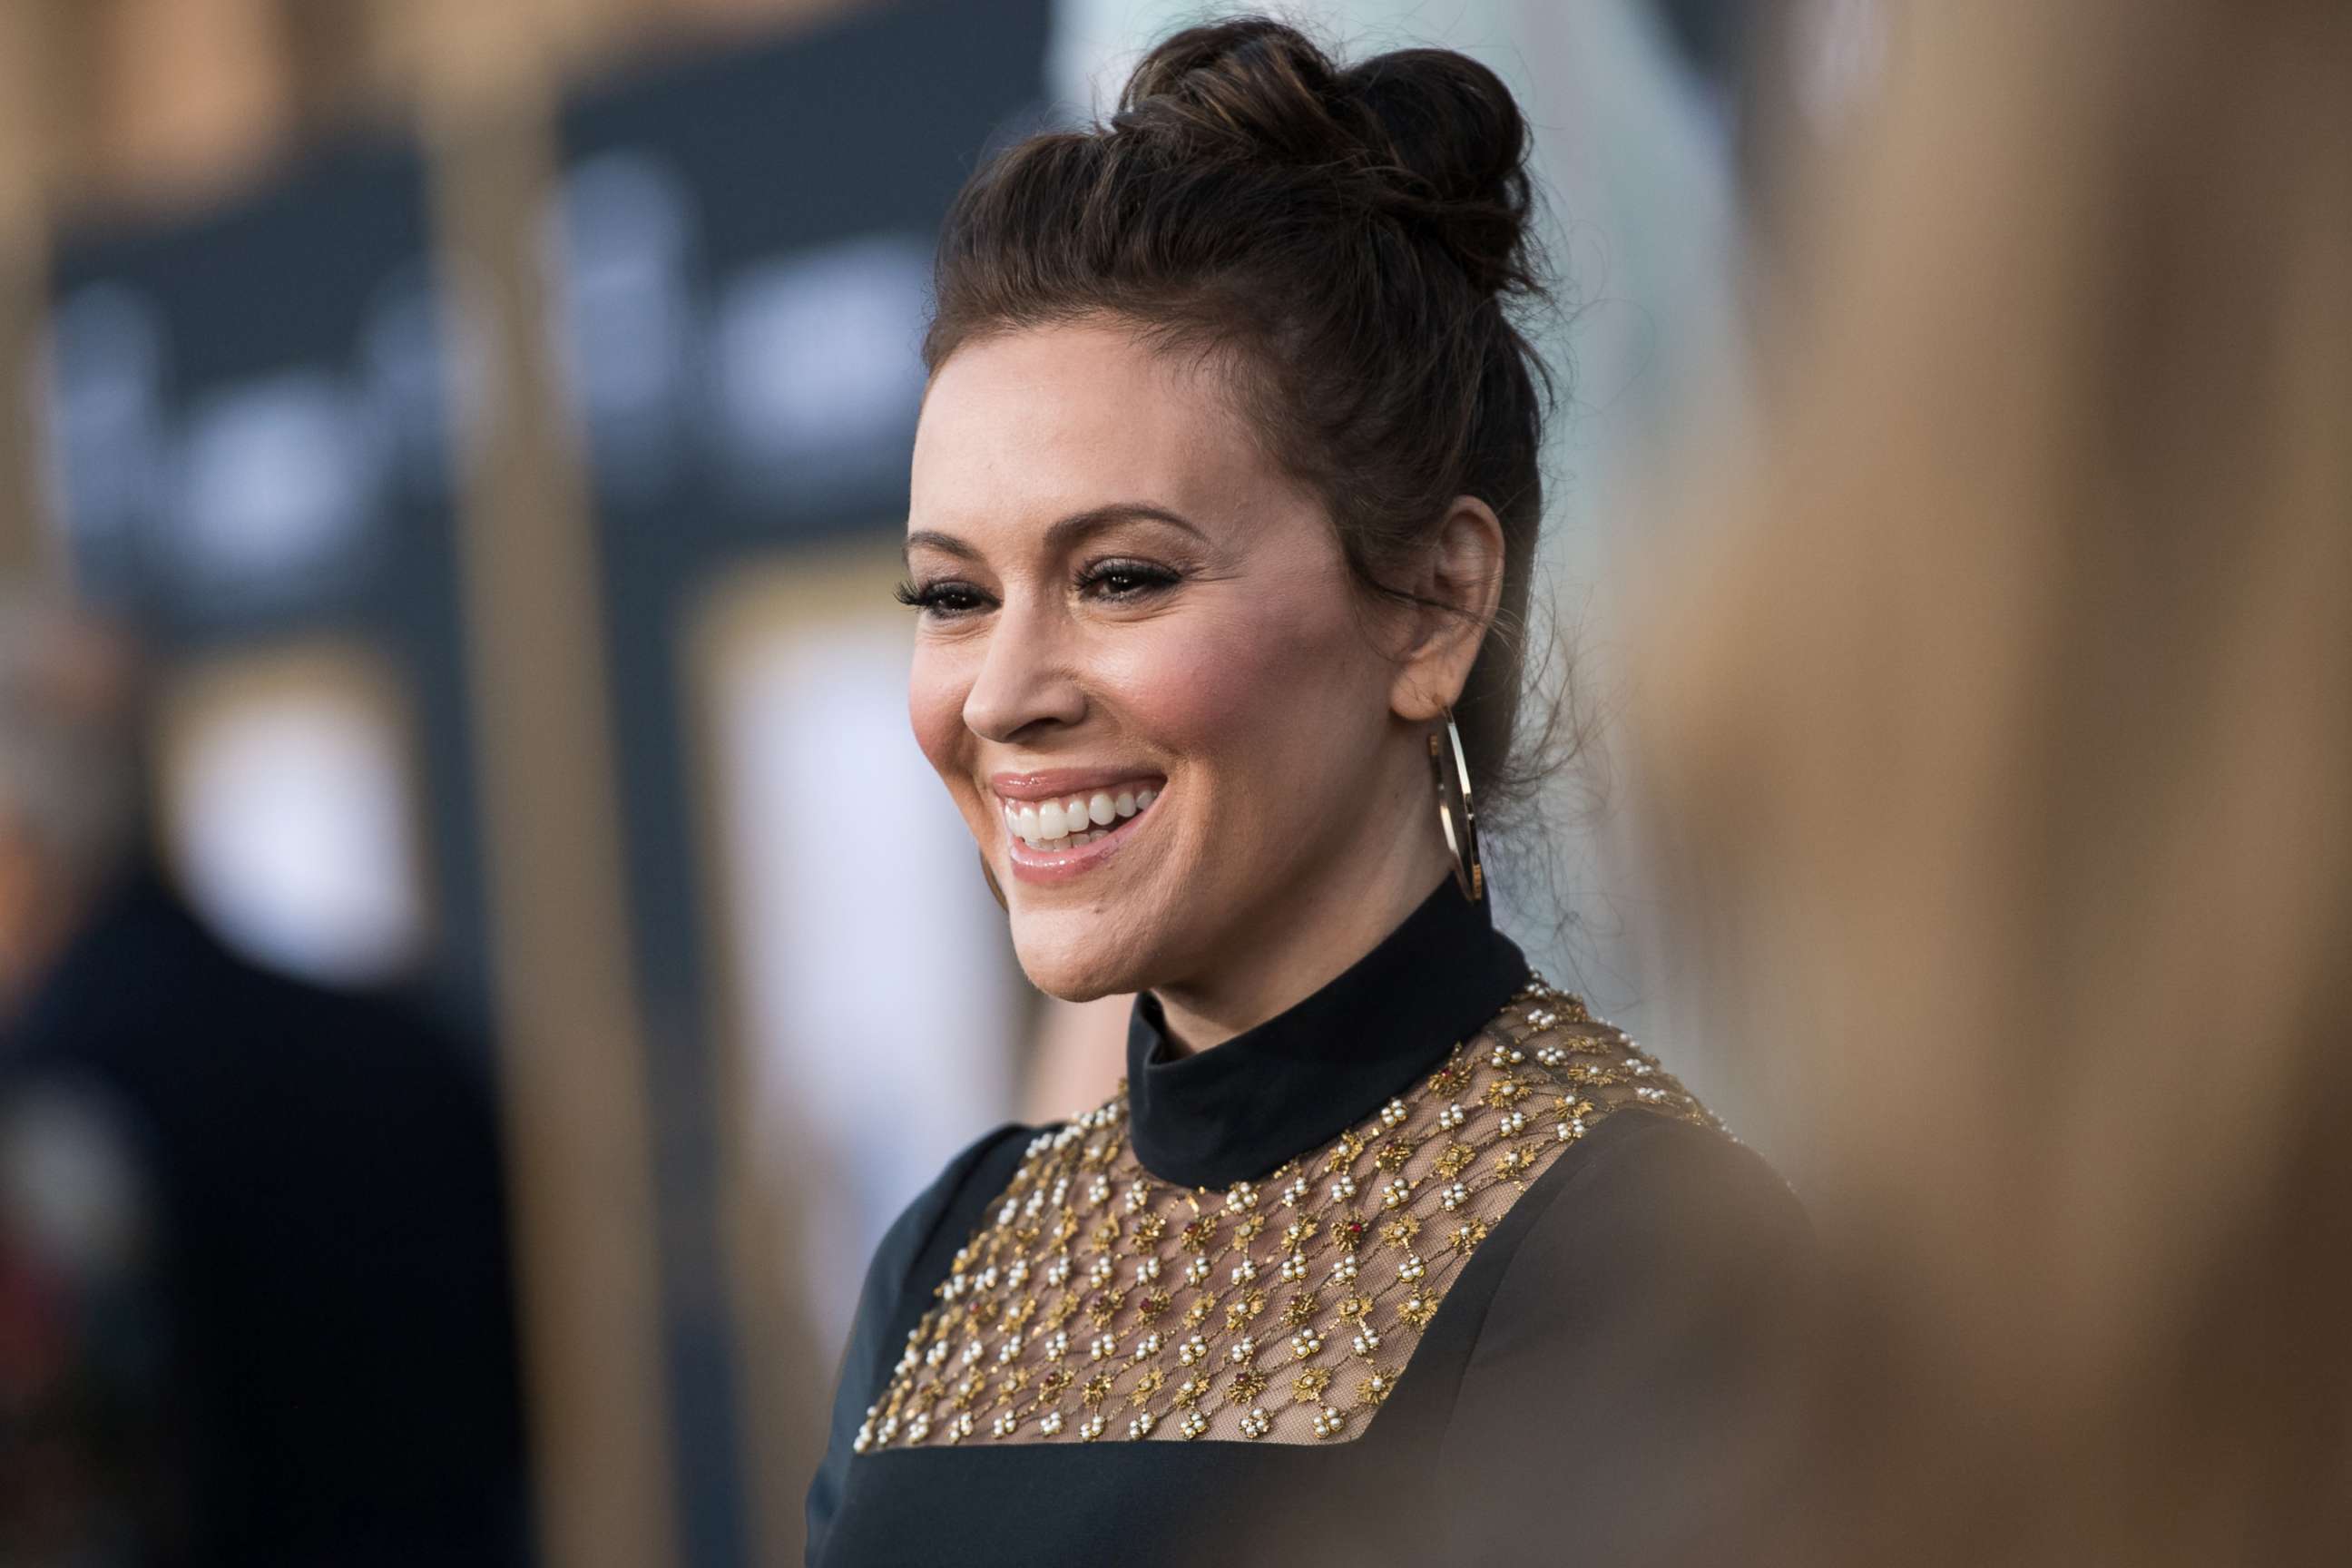 PHOTO: Alyssa Milano attends the premiere of Warner Bros. Pictures' "A Star Is Born" at The Shrine Auditorium, Sept. 24, 2018, in Los Angeles.